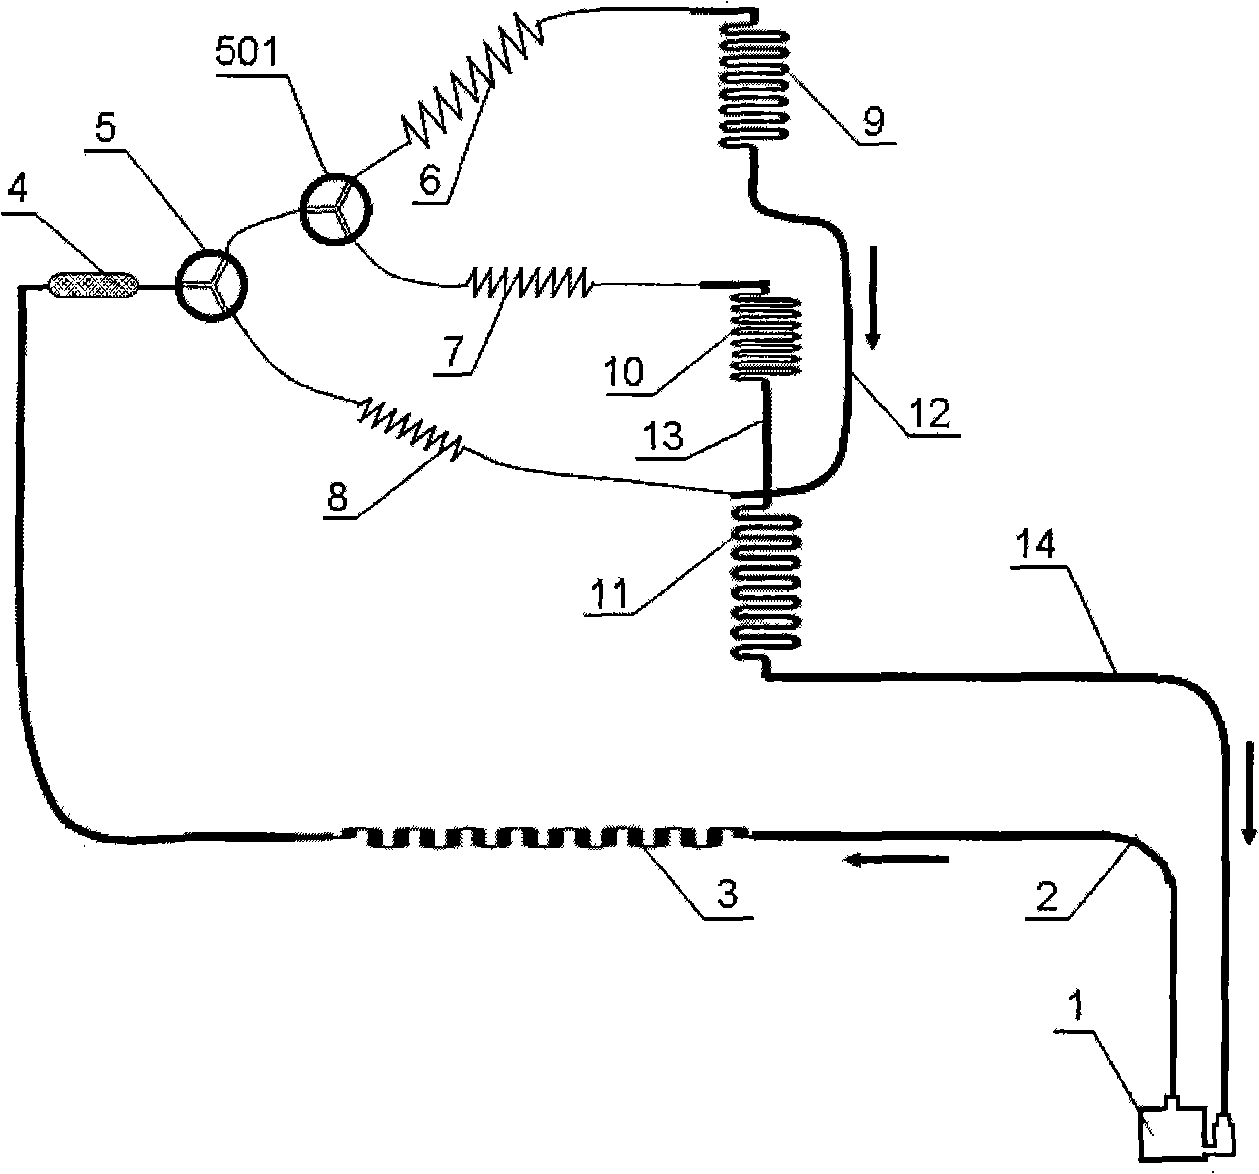 Refrigerator with double capillary tubes and multiple refrigerating loops